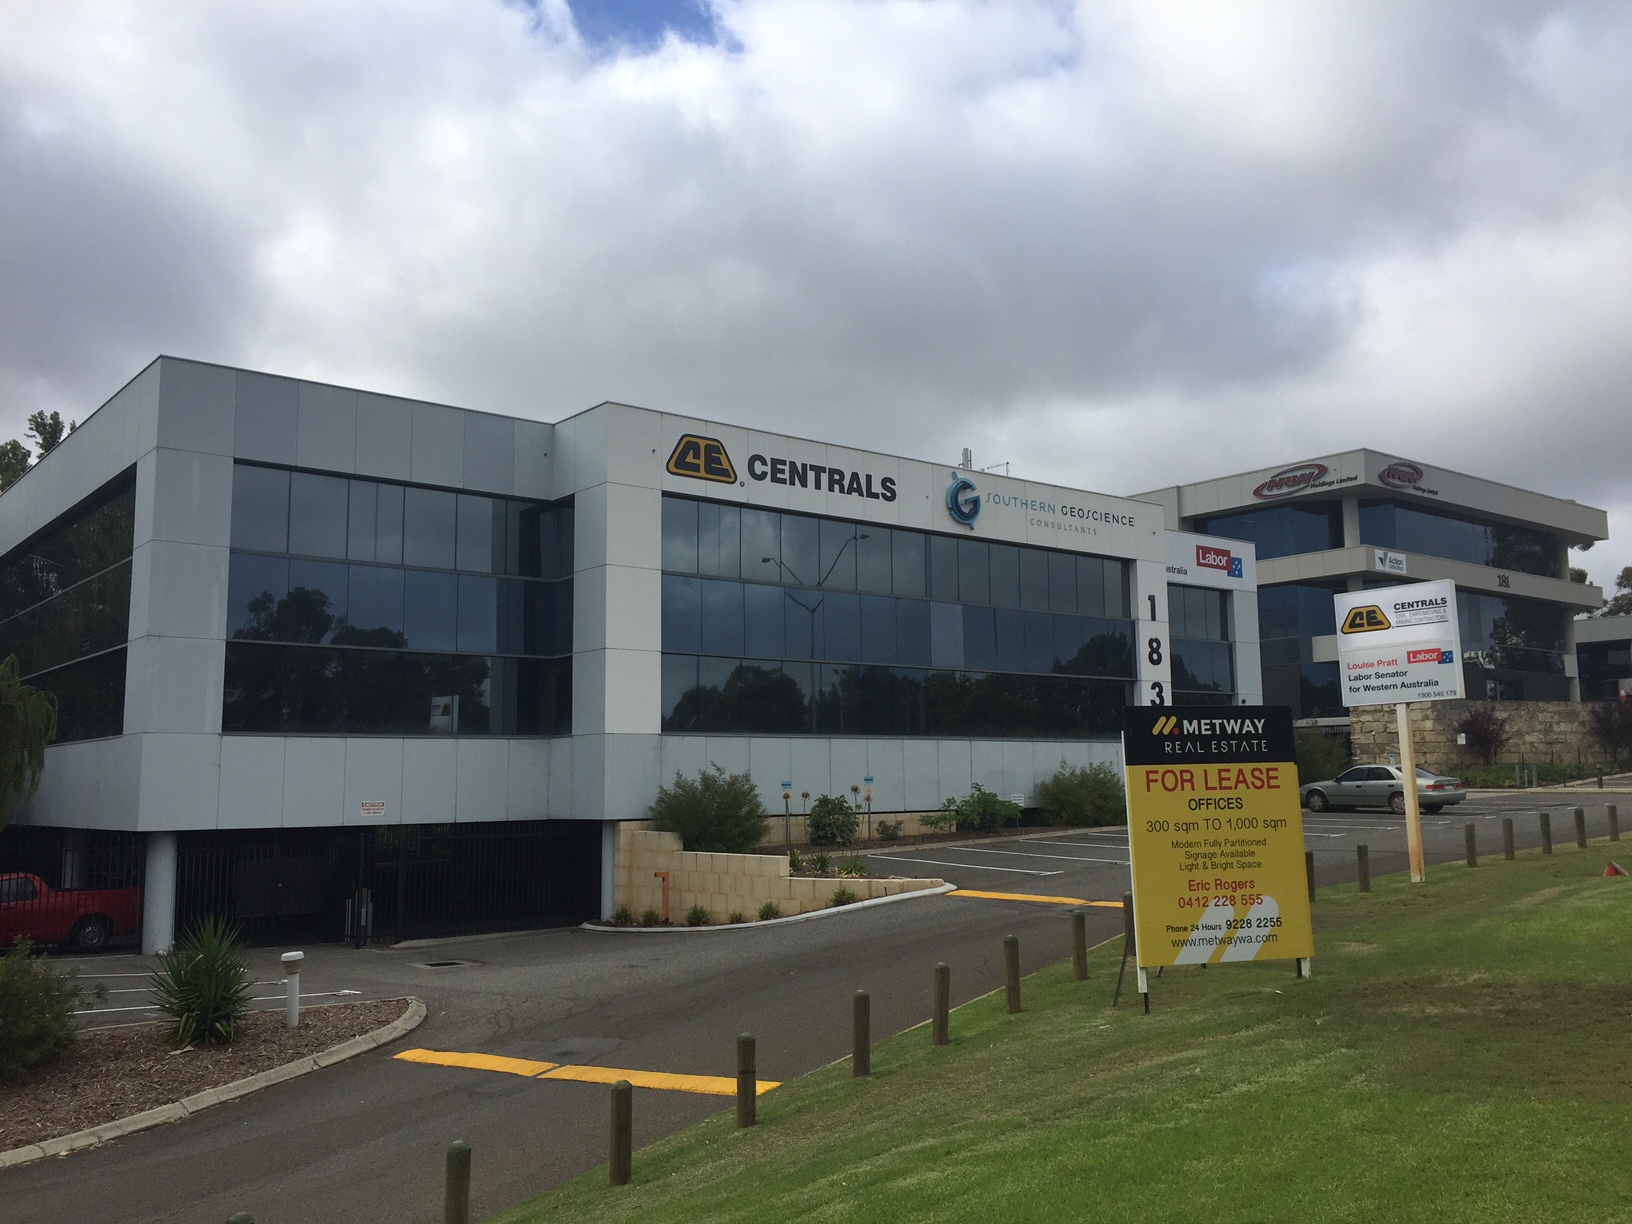 Centrals expands its Operations to Perth